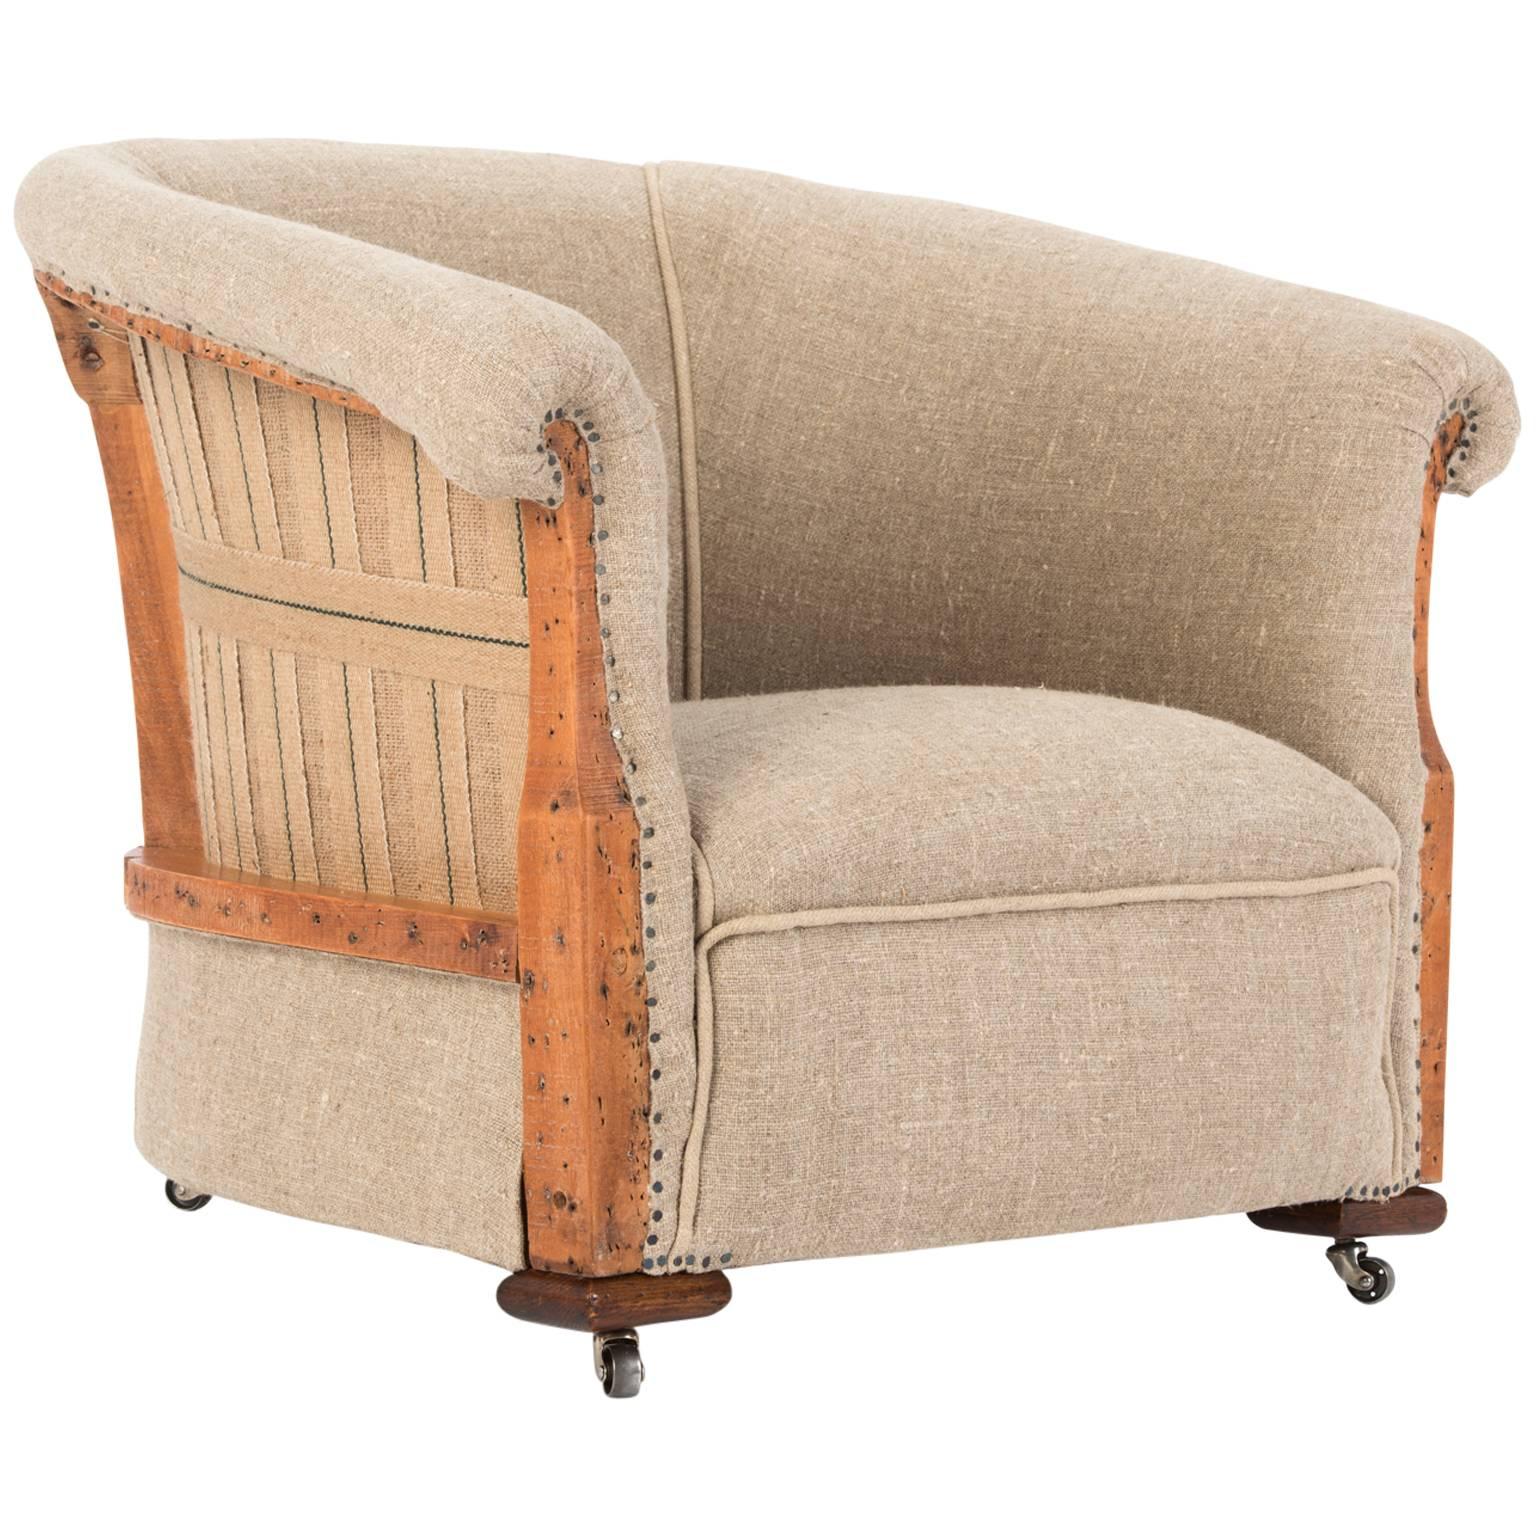 Unique and quirky original late Victorian tub chair traditionally restored and reupholstered in a classic organic flax linen with detailed exposed waxed frame, beautifully shaped revealed frame showing both traditional upholstery methods, webbing